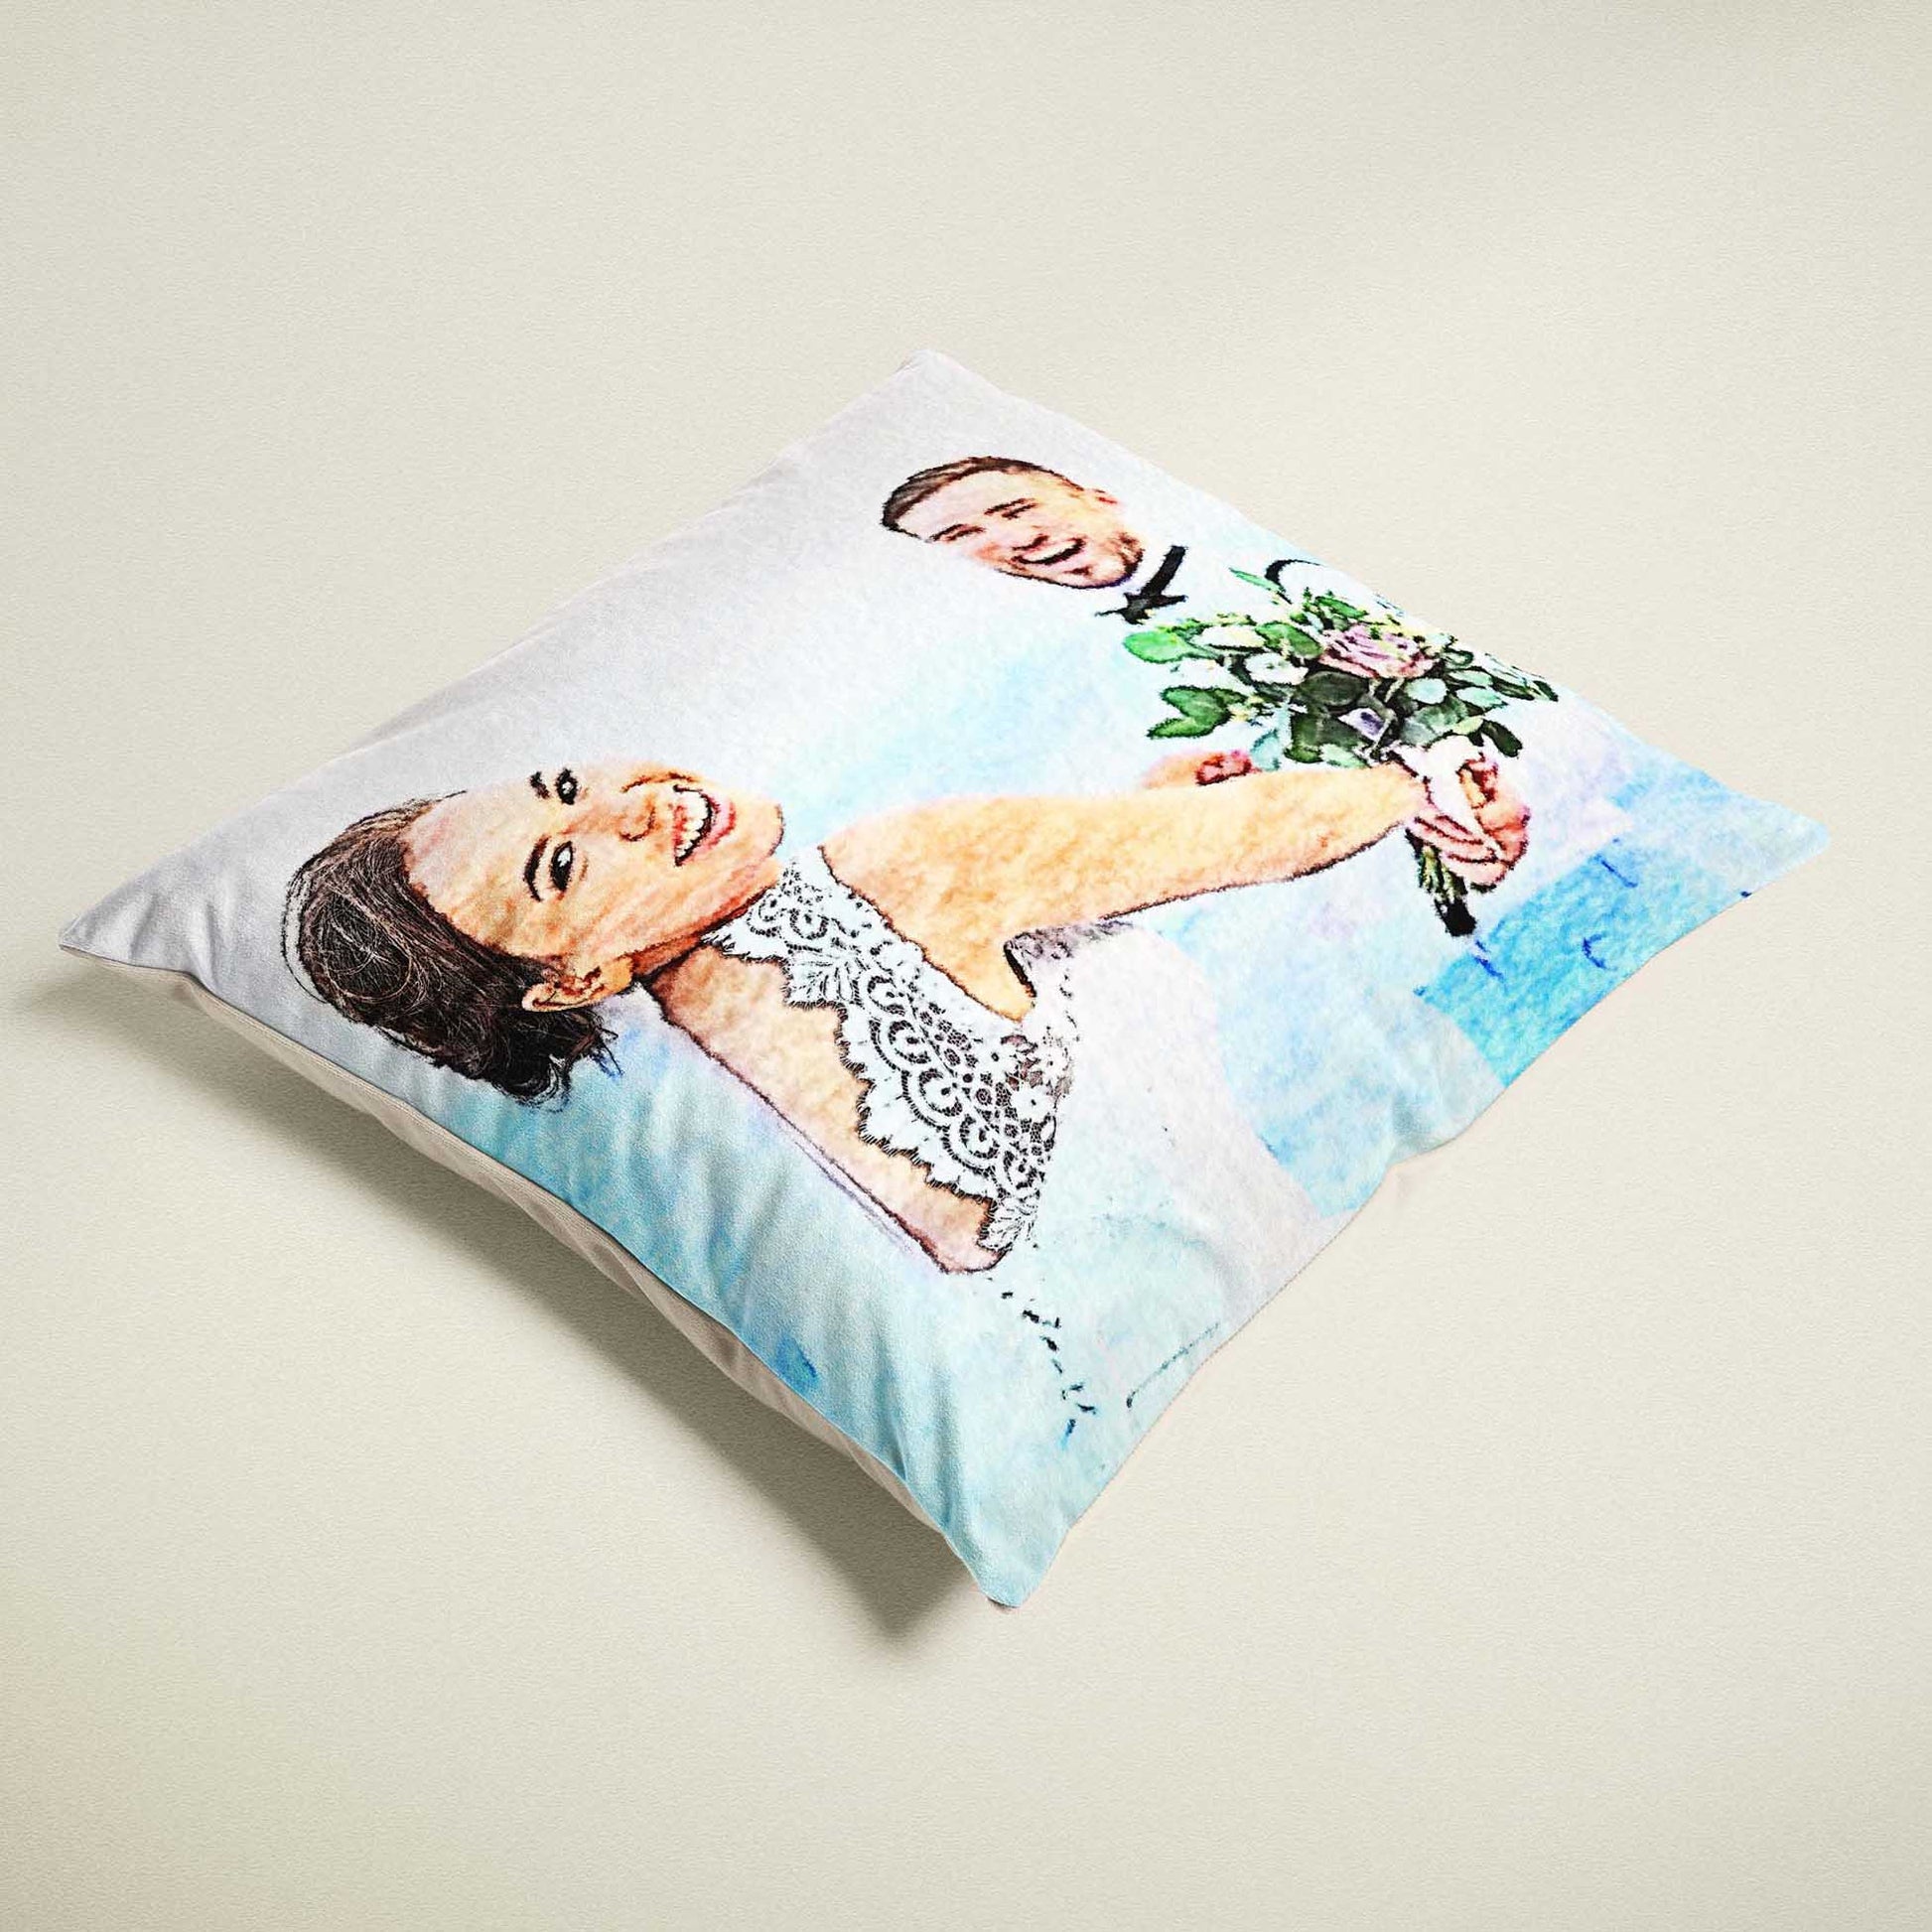 Enhance your home decor with a personalized watercolor painting cushion. Crafted from soft velvet fabric, this luxurious and natural accessory brings an elegant touch to any room. With the option to print from your photo